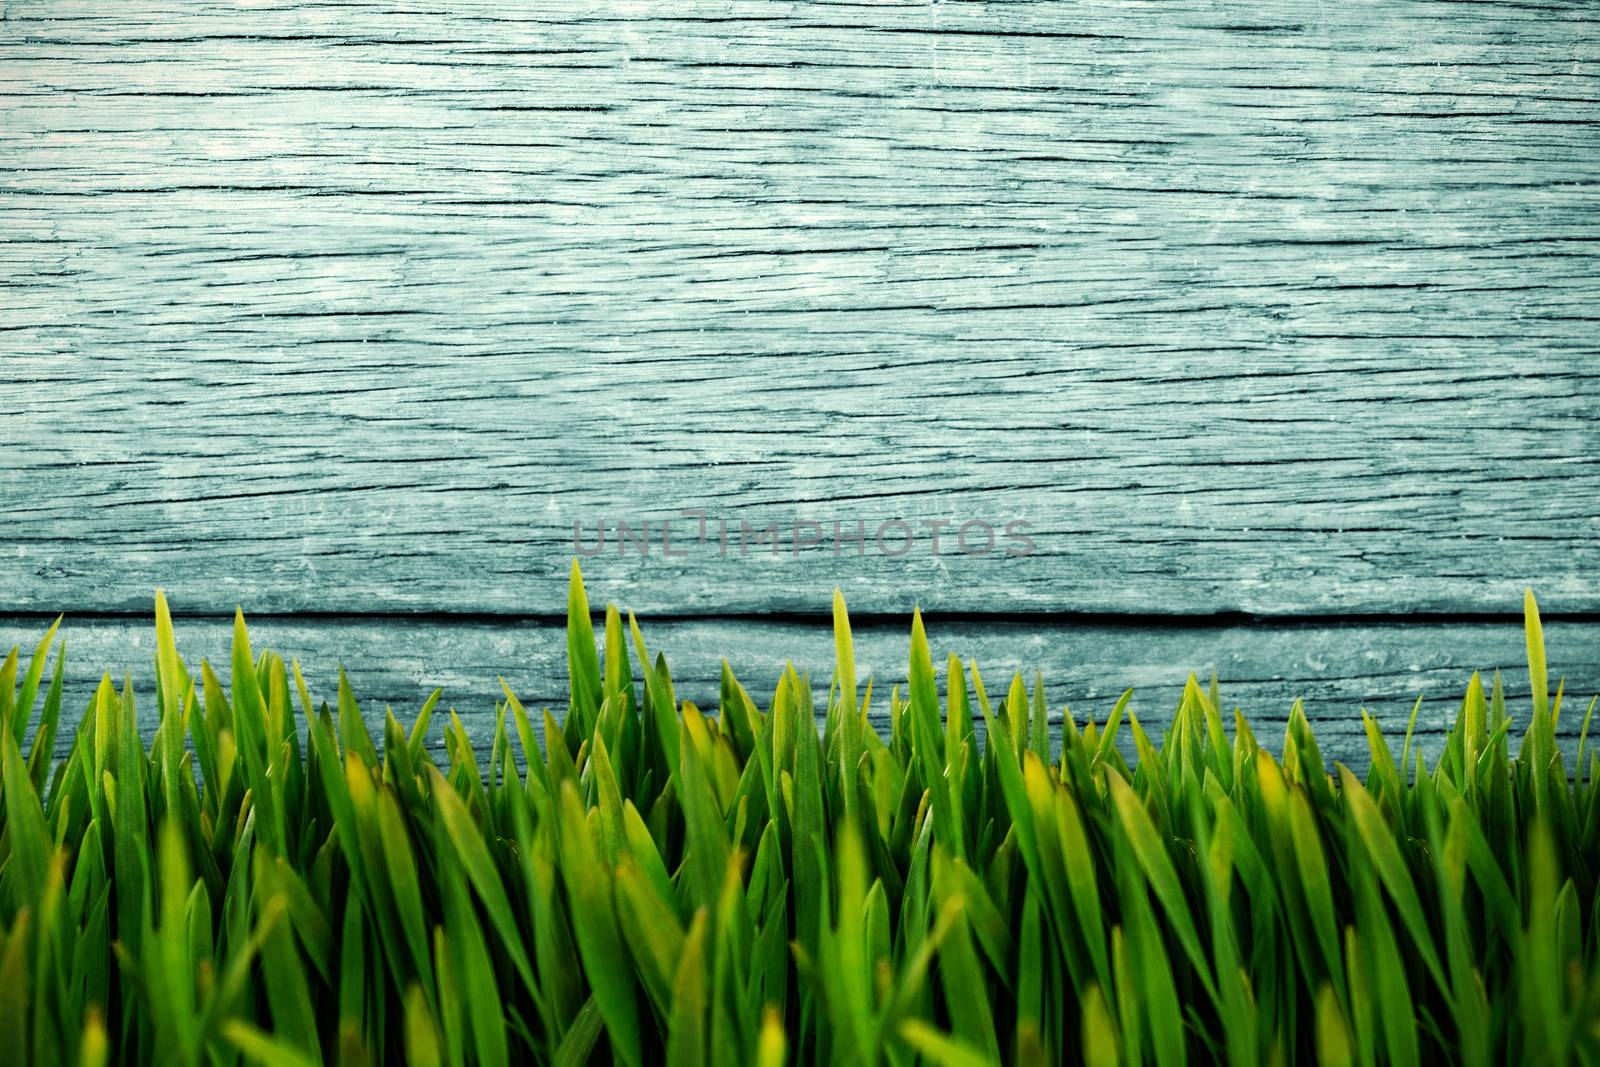 Grass growing outdoors against wood